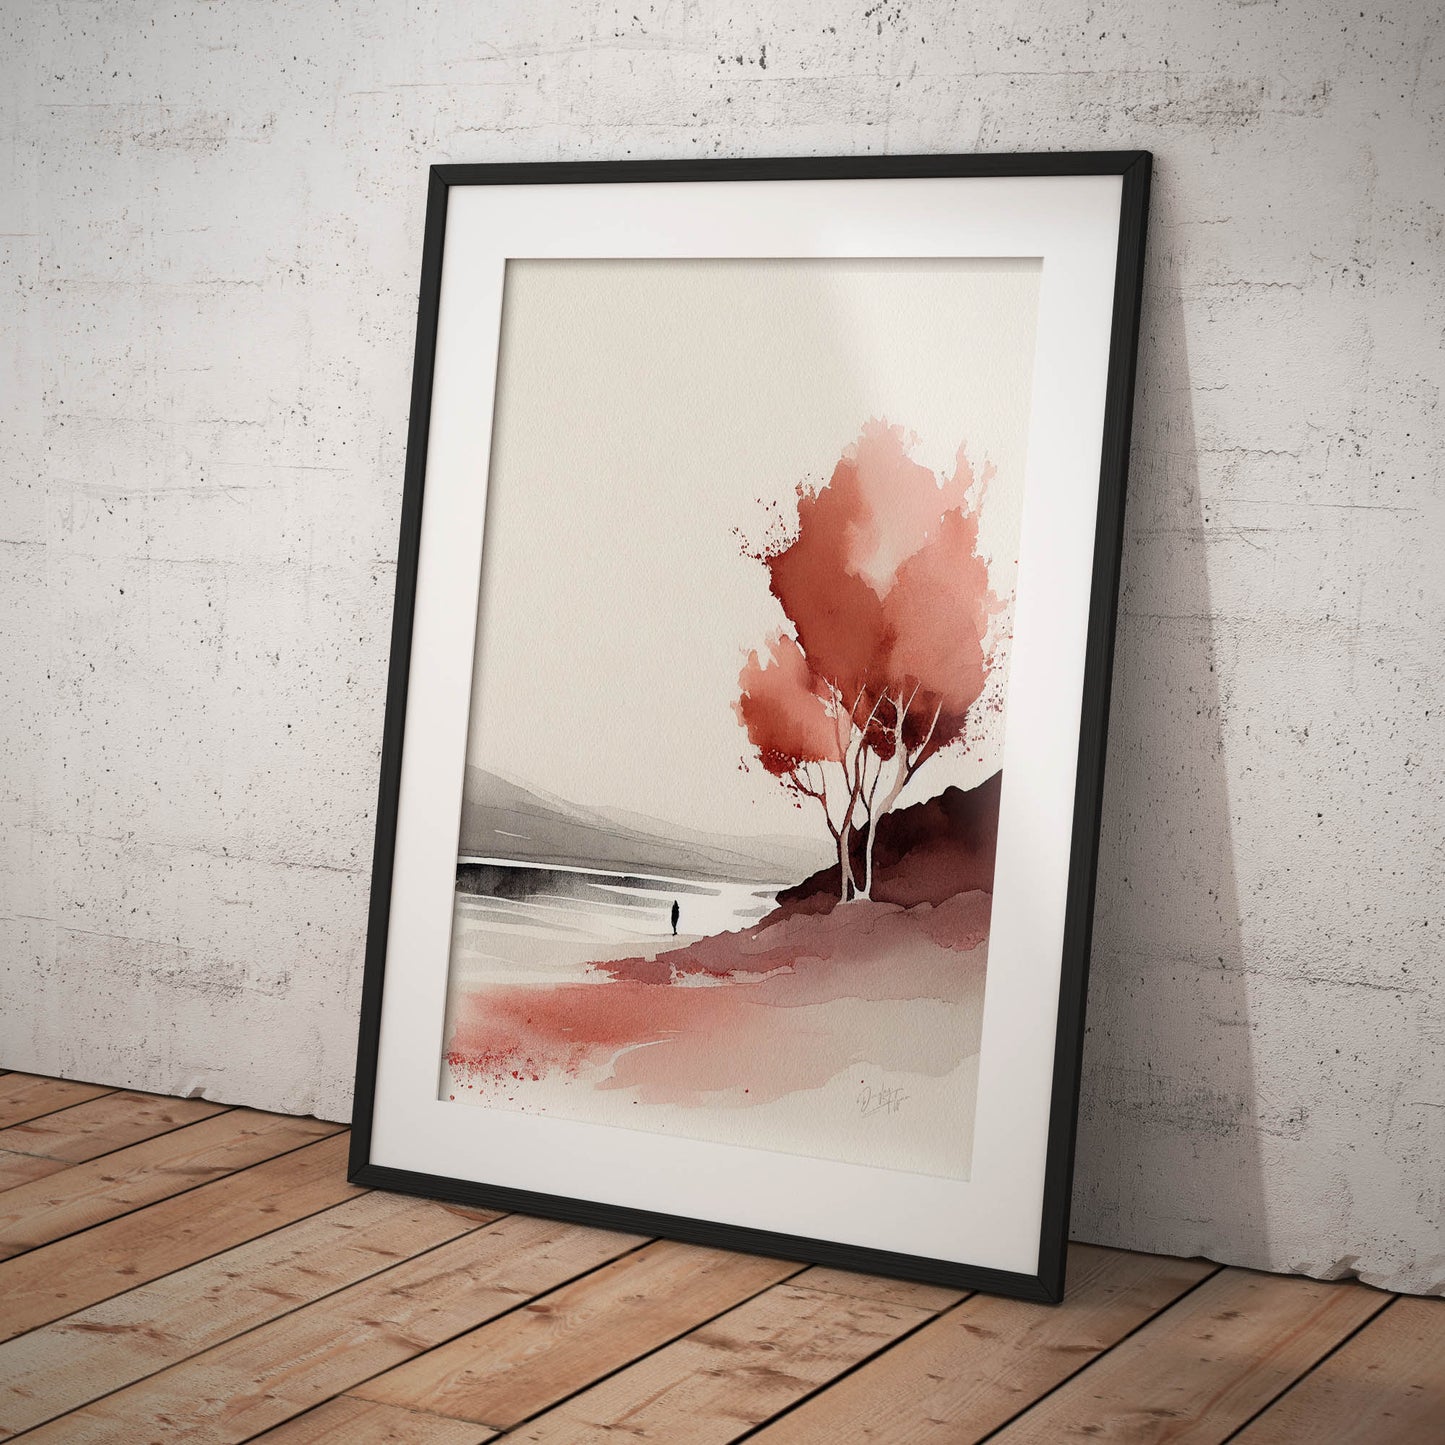 »My Dreamy Landscapes and Shades of Red« retro poster